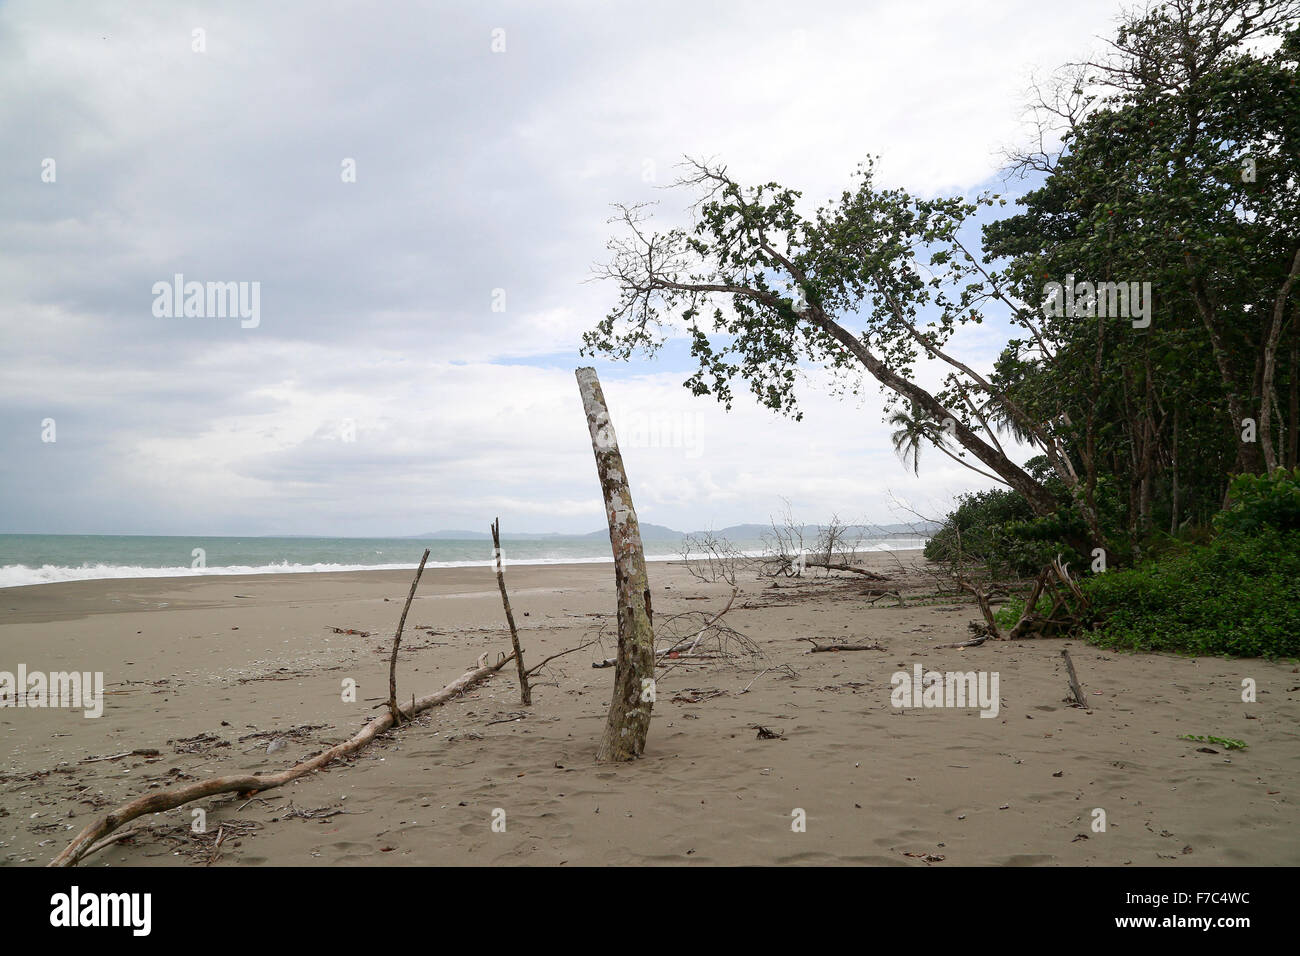 (151129) -- LIMON, Nov. 29, 2015 (Xinhua) -- Image taken on Nov. 24, 2015 shows a dead tree on an eroded beach of Cahuita National Park, in Limon Province, southern Costa Rica. According to the ranger Cristian Brenes, rising sea levels and strong waves due to climate change have removed nearly 50 meters of beach along the coast of Cahuita National Park. The case of Cahuita National Park is not the only one in Costa Rica, which has 1,290km of coastline. More than 40 percent of Costa Rican beaches have erosion, a process that has accelerated in the last 10 years, according to reports of the Cent Stock Photo